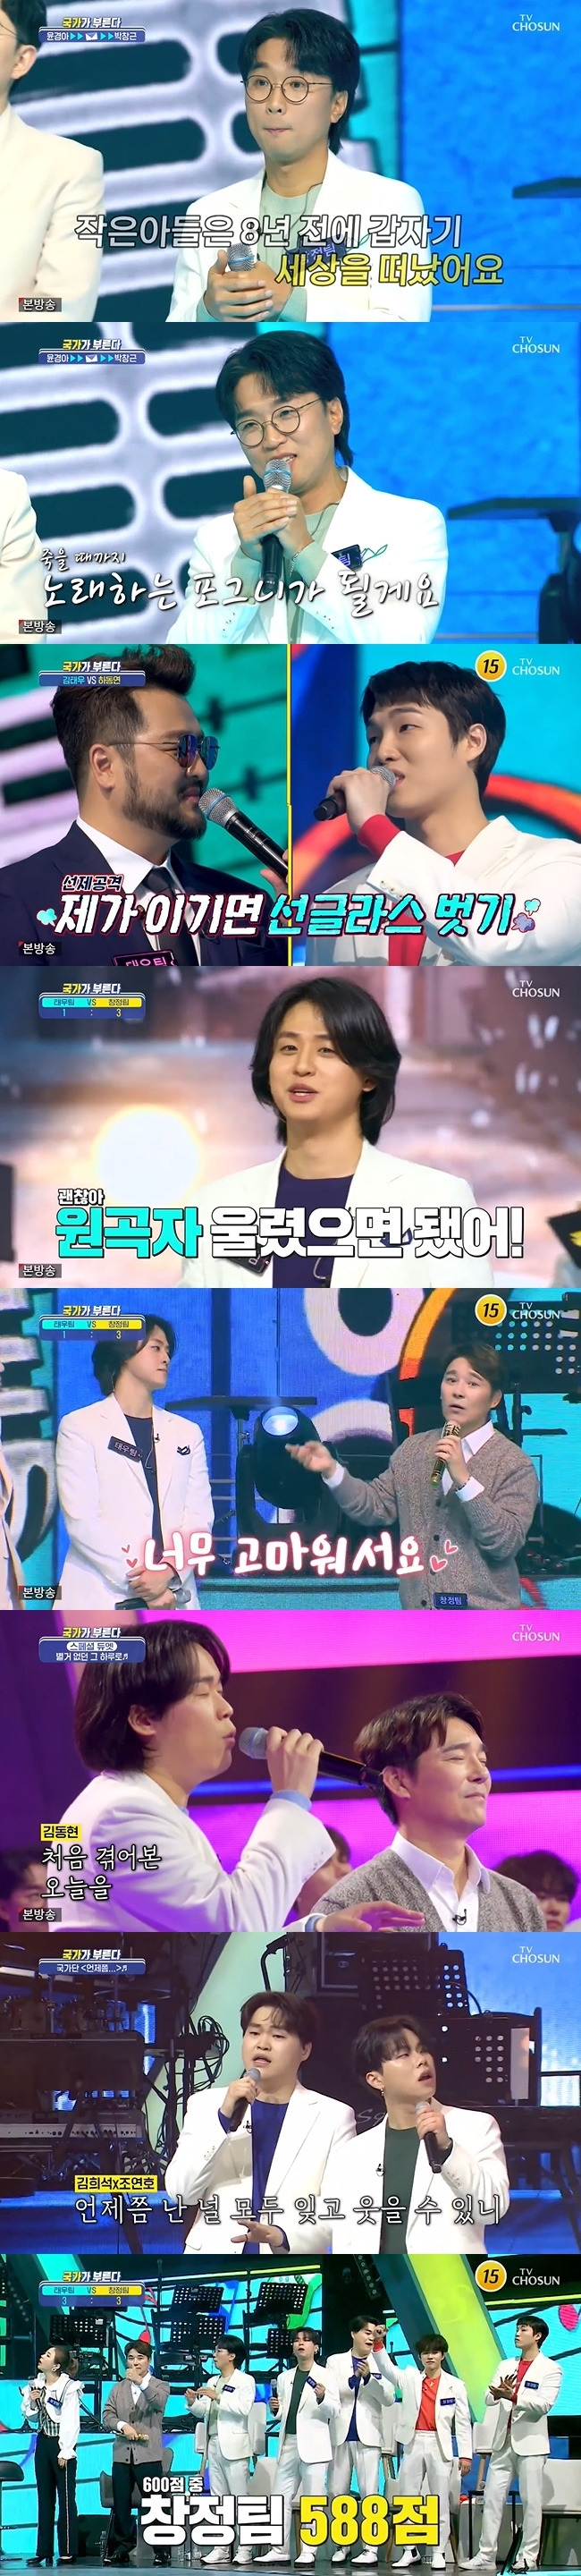 Park Jang-hyun overcame his illness after eight years of illness and shed tears on his fan story that he went to Seoul National University Medical School as the first All States.In the TV Chosun Secret Agent Miss Oh, which was broadcast on March 3, it was decorated with Legend Special with Im Chang-jung and Kim Tae Woo.The members challenged five members to become a team of Im Chang-jung who has Choices rights.Jo Yeonho, Isolmon, and Ha Dong-yeon showed a charming stage with Gone with the Wind, and Im Chang-jung said, In fact, Romon likes it.However, I think it will be too compared to me. When Chang-geun park was broadcast in 1995, he laughed and shouted, If you know that, you must be over 50 years old. Im Chang-jung then recruited Lee Byung-chan, Kim Young-heum and Kim Hee-seok as team members.Kim Tae Woo was the team leader in the team, and Lee Byeong-chan asked Jo Yeonho, the team leader, You know your brother?Jo Yeonho was old singer and embarrassed Im Chang-jung.Im Chang-jung said, We are burnt and we are called old singers. Kim Tae Woo laughed at the line as former singer.Lee Byung-chan won 100 points for Marry me and won Jo Yeonho.Park Jang-hyun and Chang-geun park faced each other in the application song showdown.Park Jang-hyun overcame the complex site pain syndrome (CRPS) that he had suffered for eight years and shed tears on the story of a fan who passed the Seoul National University Medical School as the first in the All States.Park Jang-hyun, who was enthusiastic about Park Hyo-shins Wildflower for a fan who said he was comforted by listening to his two people, received 98 points and cheered the fans, Thank you, do not hurt again.Chang-geun park told a 70-year-old fan that he was comforted by recalling his small son who died eight years ago on the stage of the days he called in the national singer. I do not hear a lot of people saying that I will go to a good place if I shake it out of my mind.I also thought it was easy to hear that, and if you do it yourself, it does not work well.  It makes me uncomfortable to say easily that we should shake it off together. I want to give comfort to you to sing with your heart until you die. I want to meet you like this. After comforting you, you received 100 points for singing the application song Rock Island .Kim Tae Woo scored 97 points for Sleeping Night Rain and beat Ha Dong-yeon, who called I Am Butterfly, by one point, while Im Chang-jung confronted Isolmon.Im Chang-jung declared war on I can win because I meet enemies, and Isolmon laughed at the words Do not you respect Im Chang-jung and I did.Im Chang-jung imitated Bobby Kims imitation of himself and called Love . . . . . . . .You called me Love, the guy, and you couldnt find him until the song was over.I will find you instead, he said in front of the original song Im Chang-jung.Im Chang-jung was impressed by the stage of Isolmon, although the score was only 92. Im Chang-jung said, It is a big hit.I knew there was such a good song in my song today.  I was so grateful that I was tearful. This song is expressed like this, I dare not imagine (emotion).Its like a musical instrument is singing, he praised.Kim Dong-Hyun and Im Chang-jung set up a special duet stage with The Day Without Nothing, followed by Kim Dong-Hyun and Ha Dong-yeons Poison, Kim Tae Woo and Isolomon, Lee Byung-chan and Jo Yeonhos god Where You Should Be The match between the Hyon was held.Kim Young-heum received 96 points for causing horrification with please, but lost to Kim Dong-Hyun, who called Kim Soo-chuls relaxation by three points.